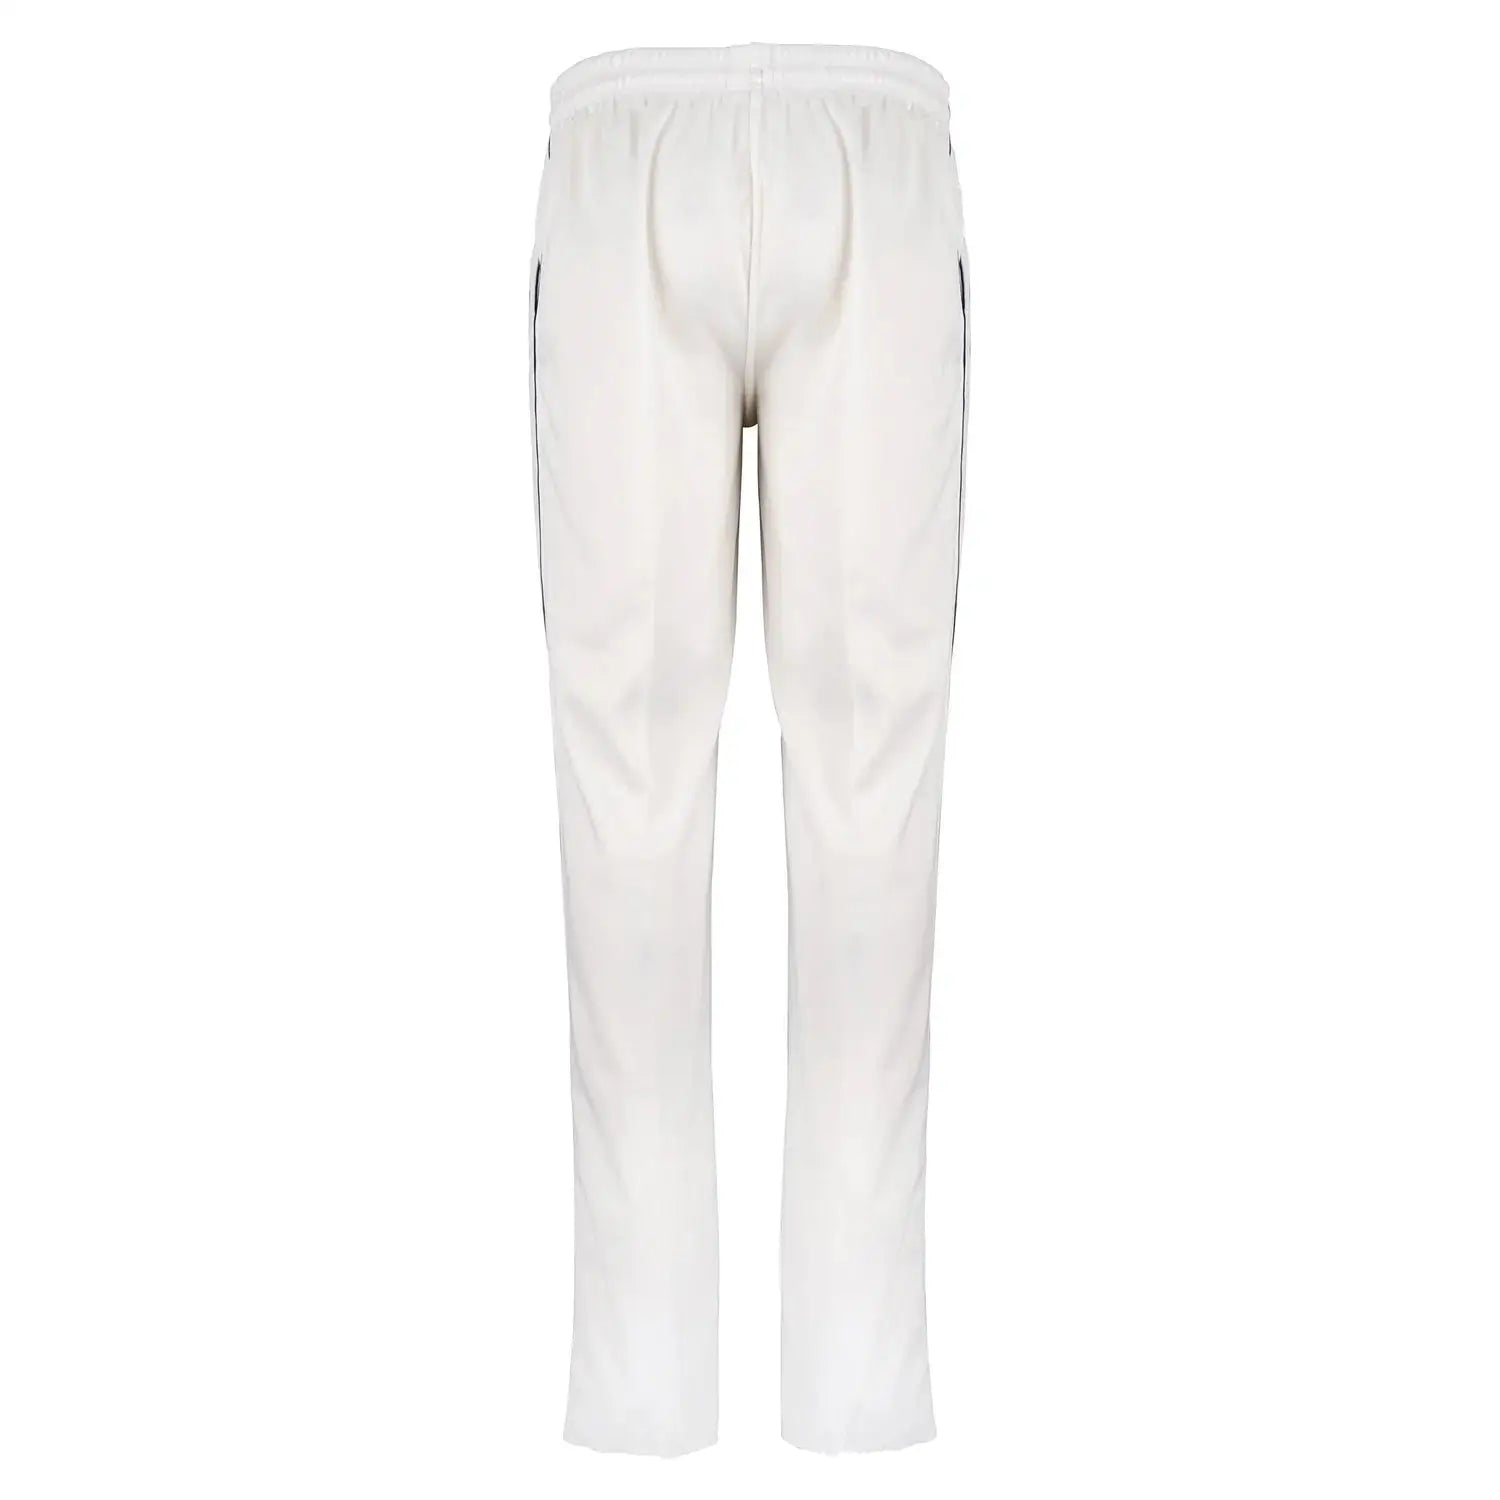 Premium Quality Cricket Trousers Match Playing Pants Bottoms Kit Off White  | eBay